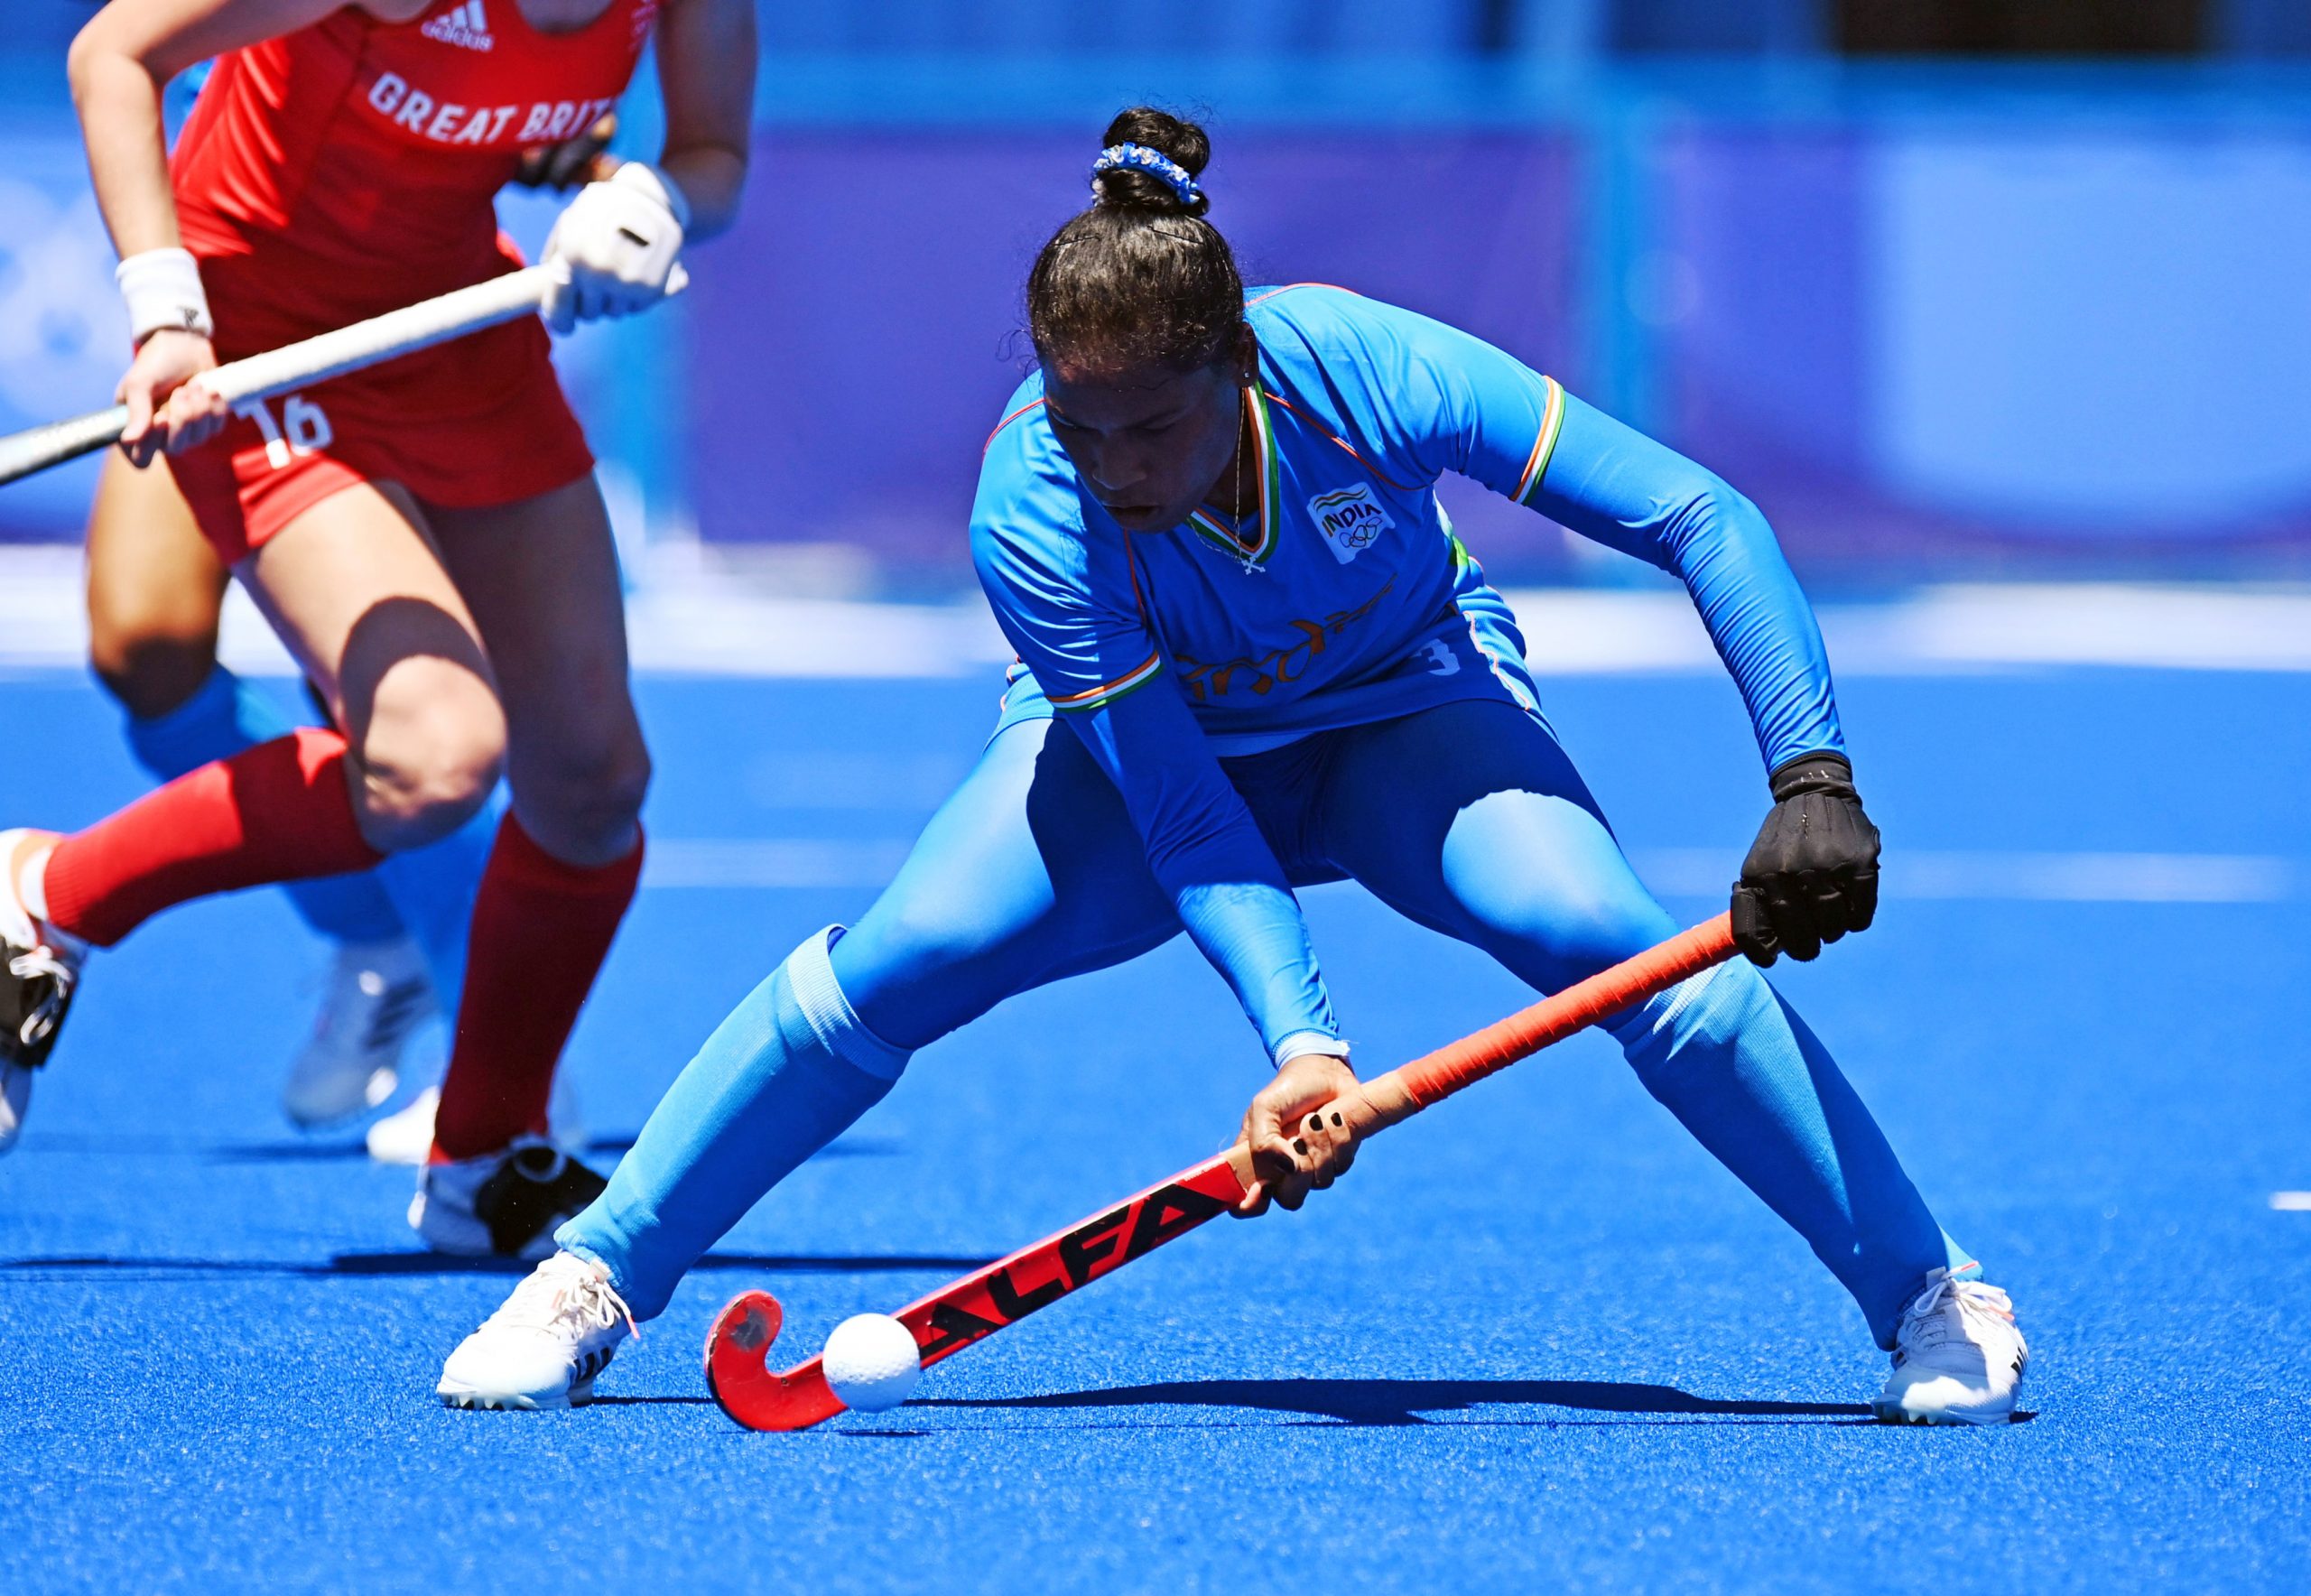 Time for a sequel? Without winning a medal, hockey girls recreate ‘Chak de India’ moment